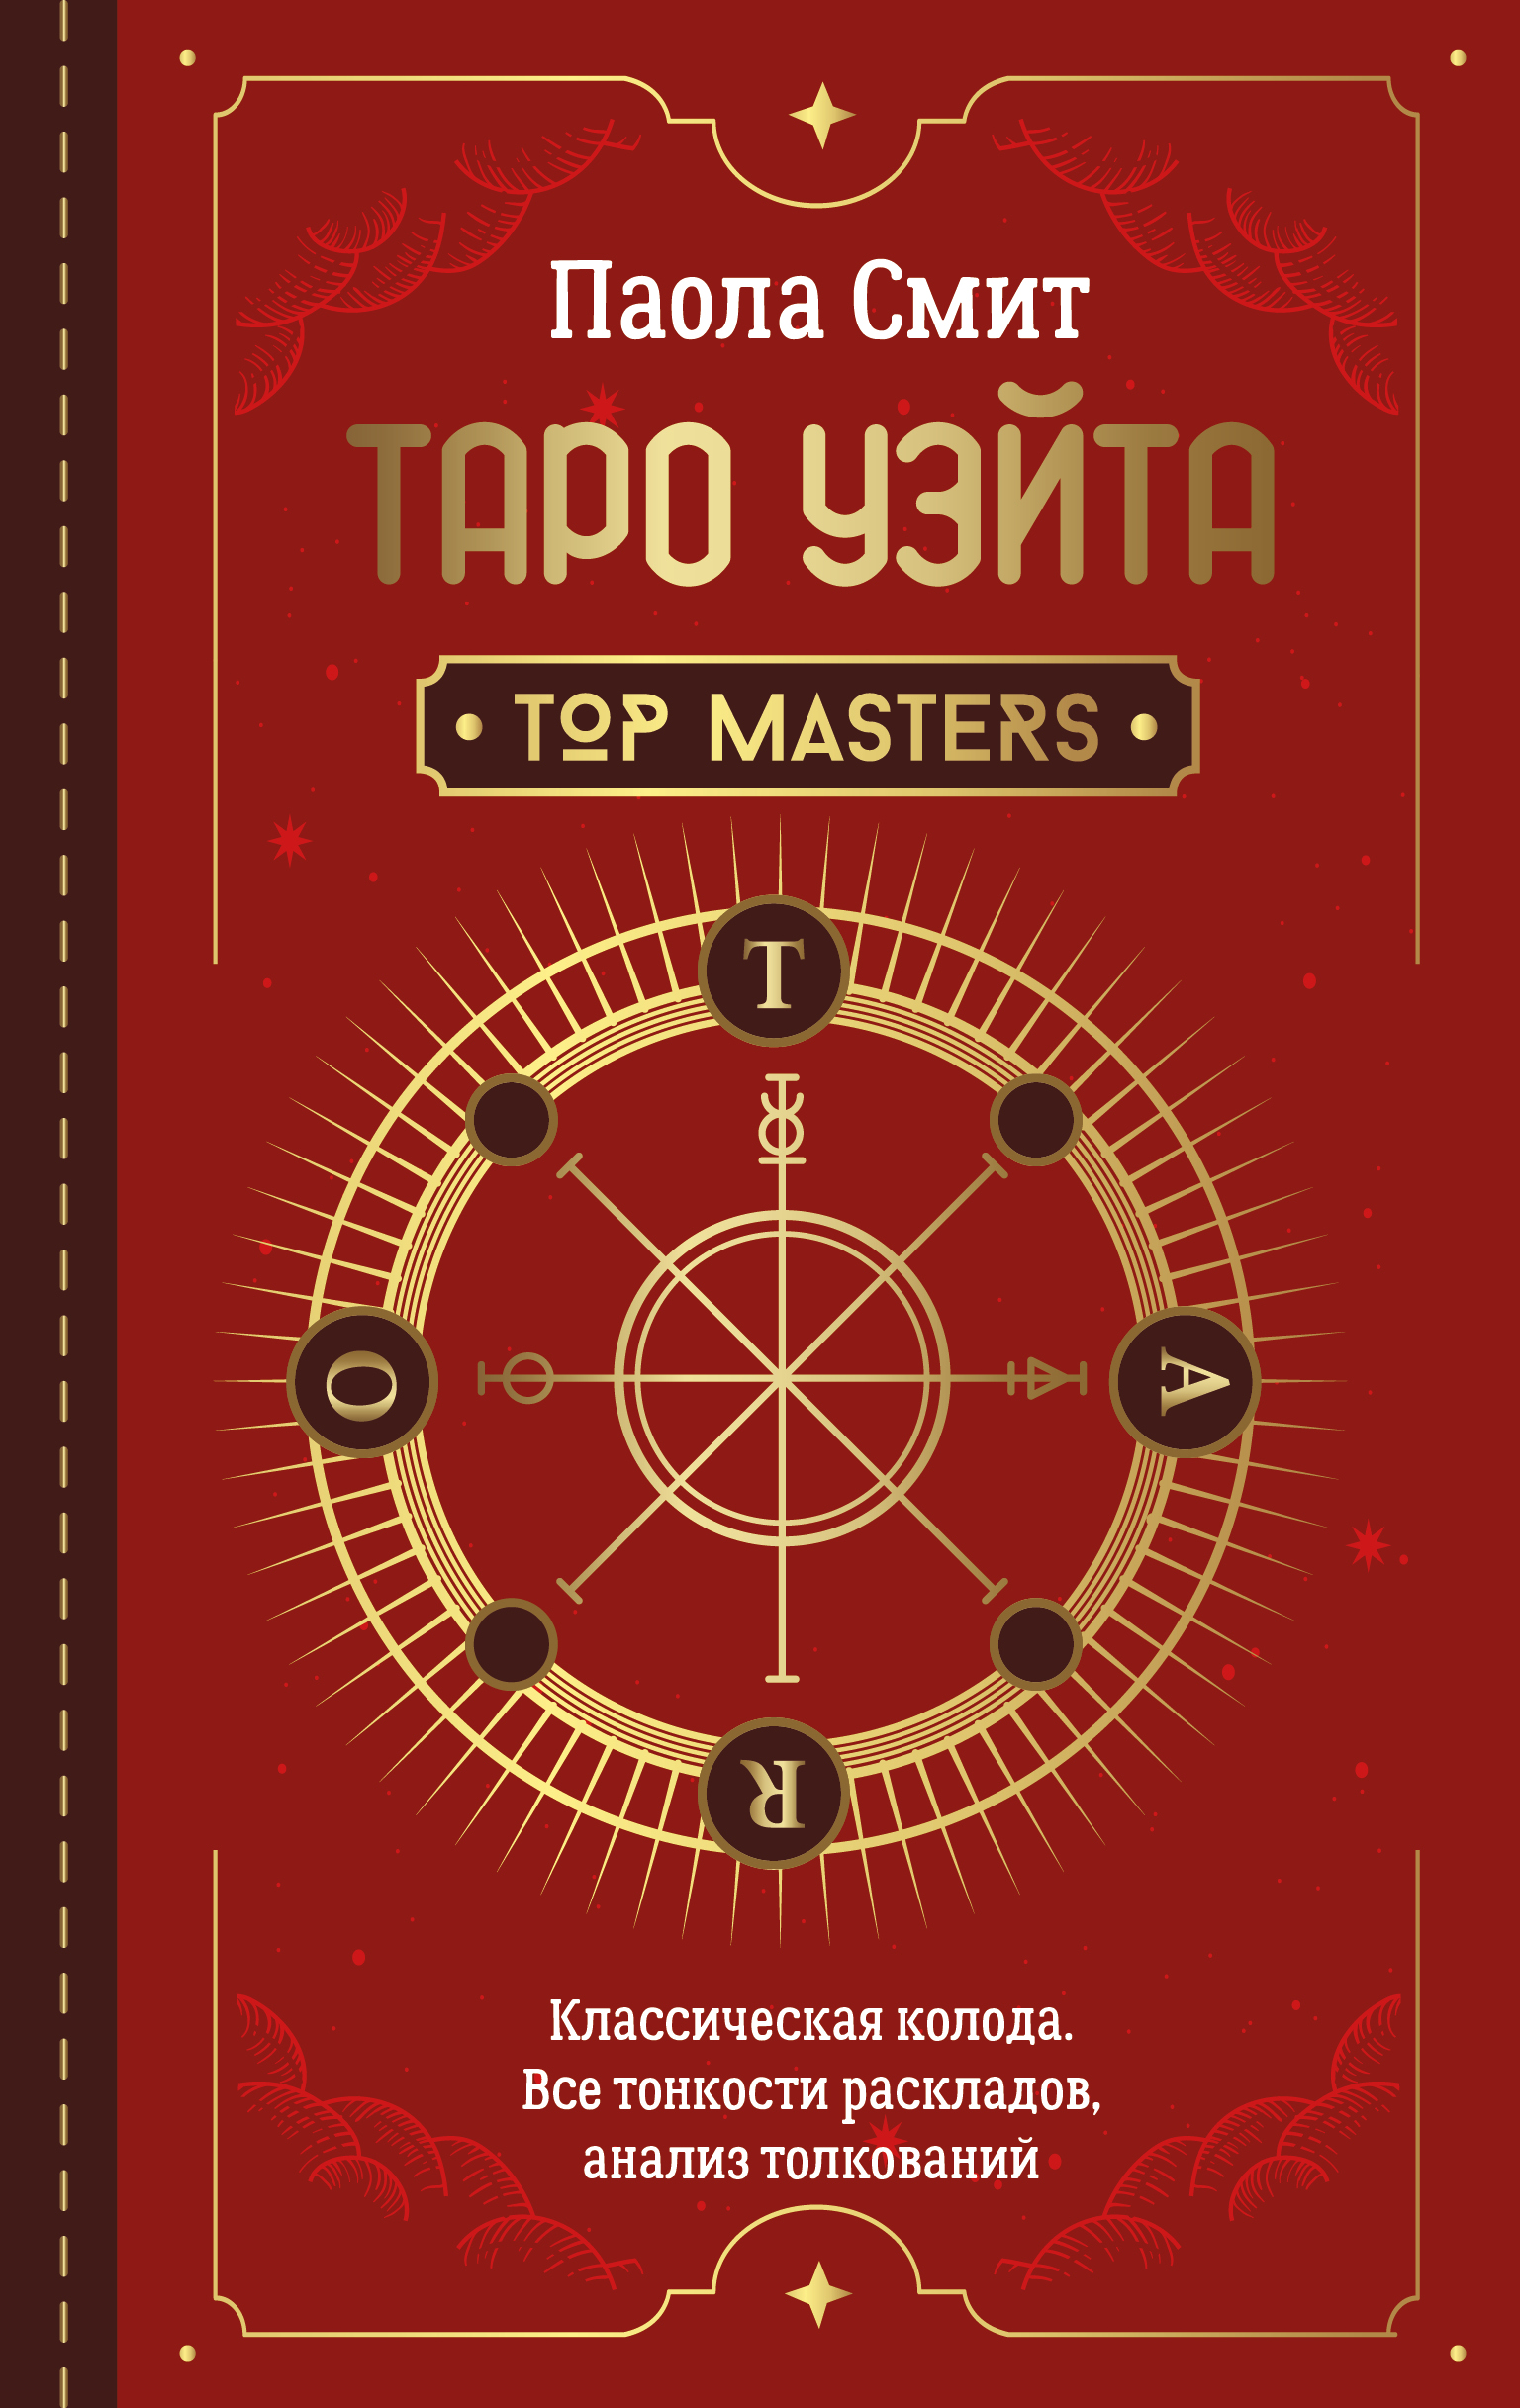  . Top Masters.  .   ,  